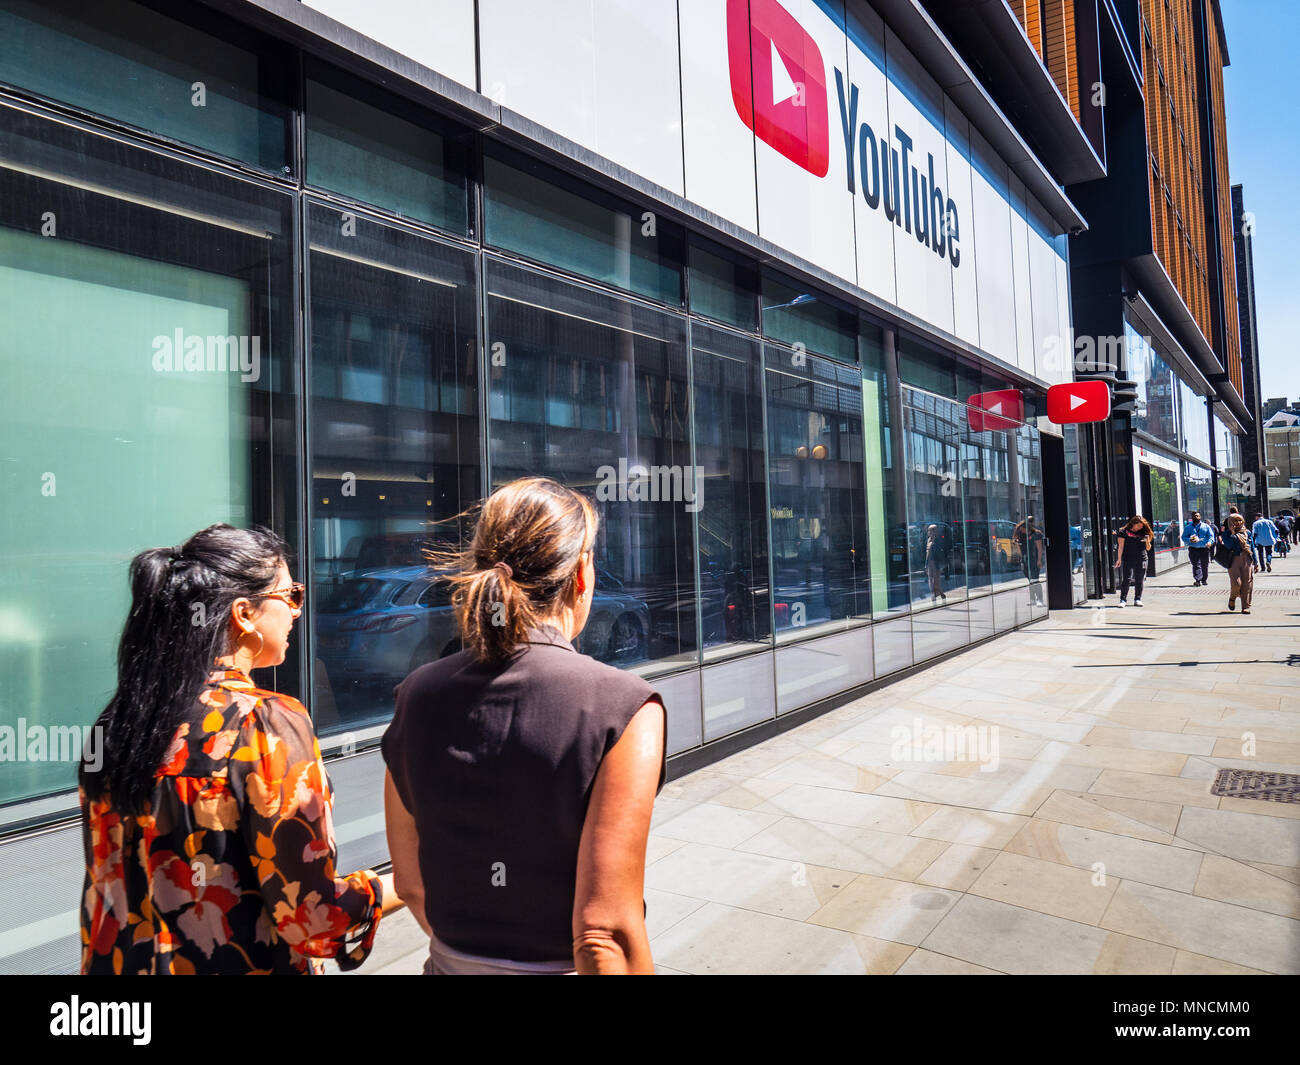 Google and Youtube London offices at 6 Pancras Square near King's Cross Station in central London UK Stock Photo